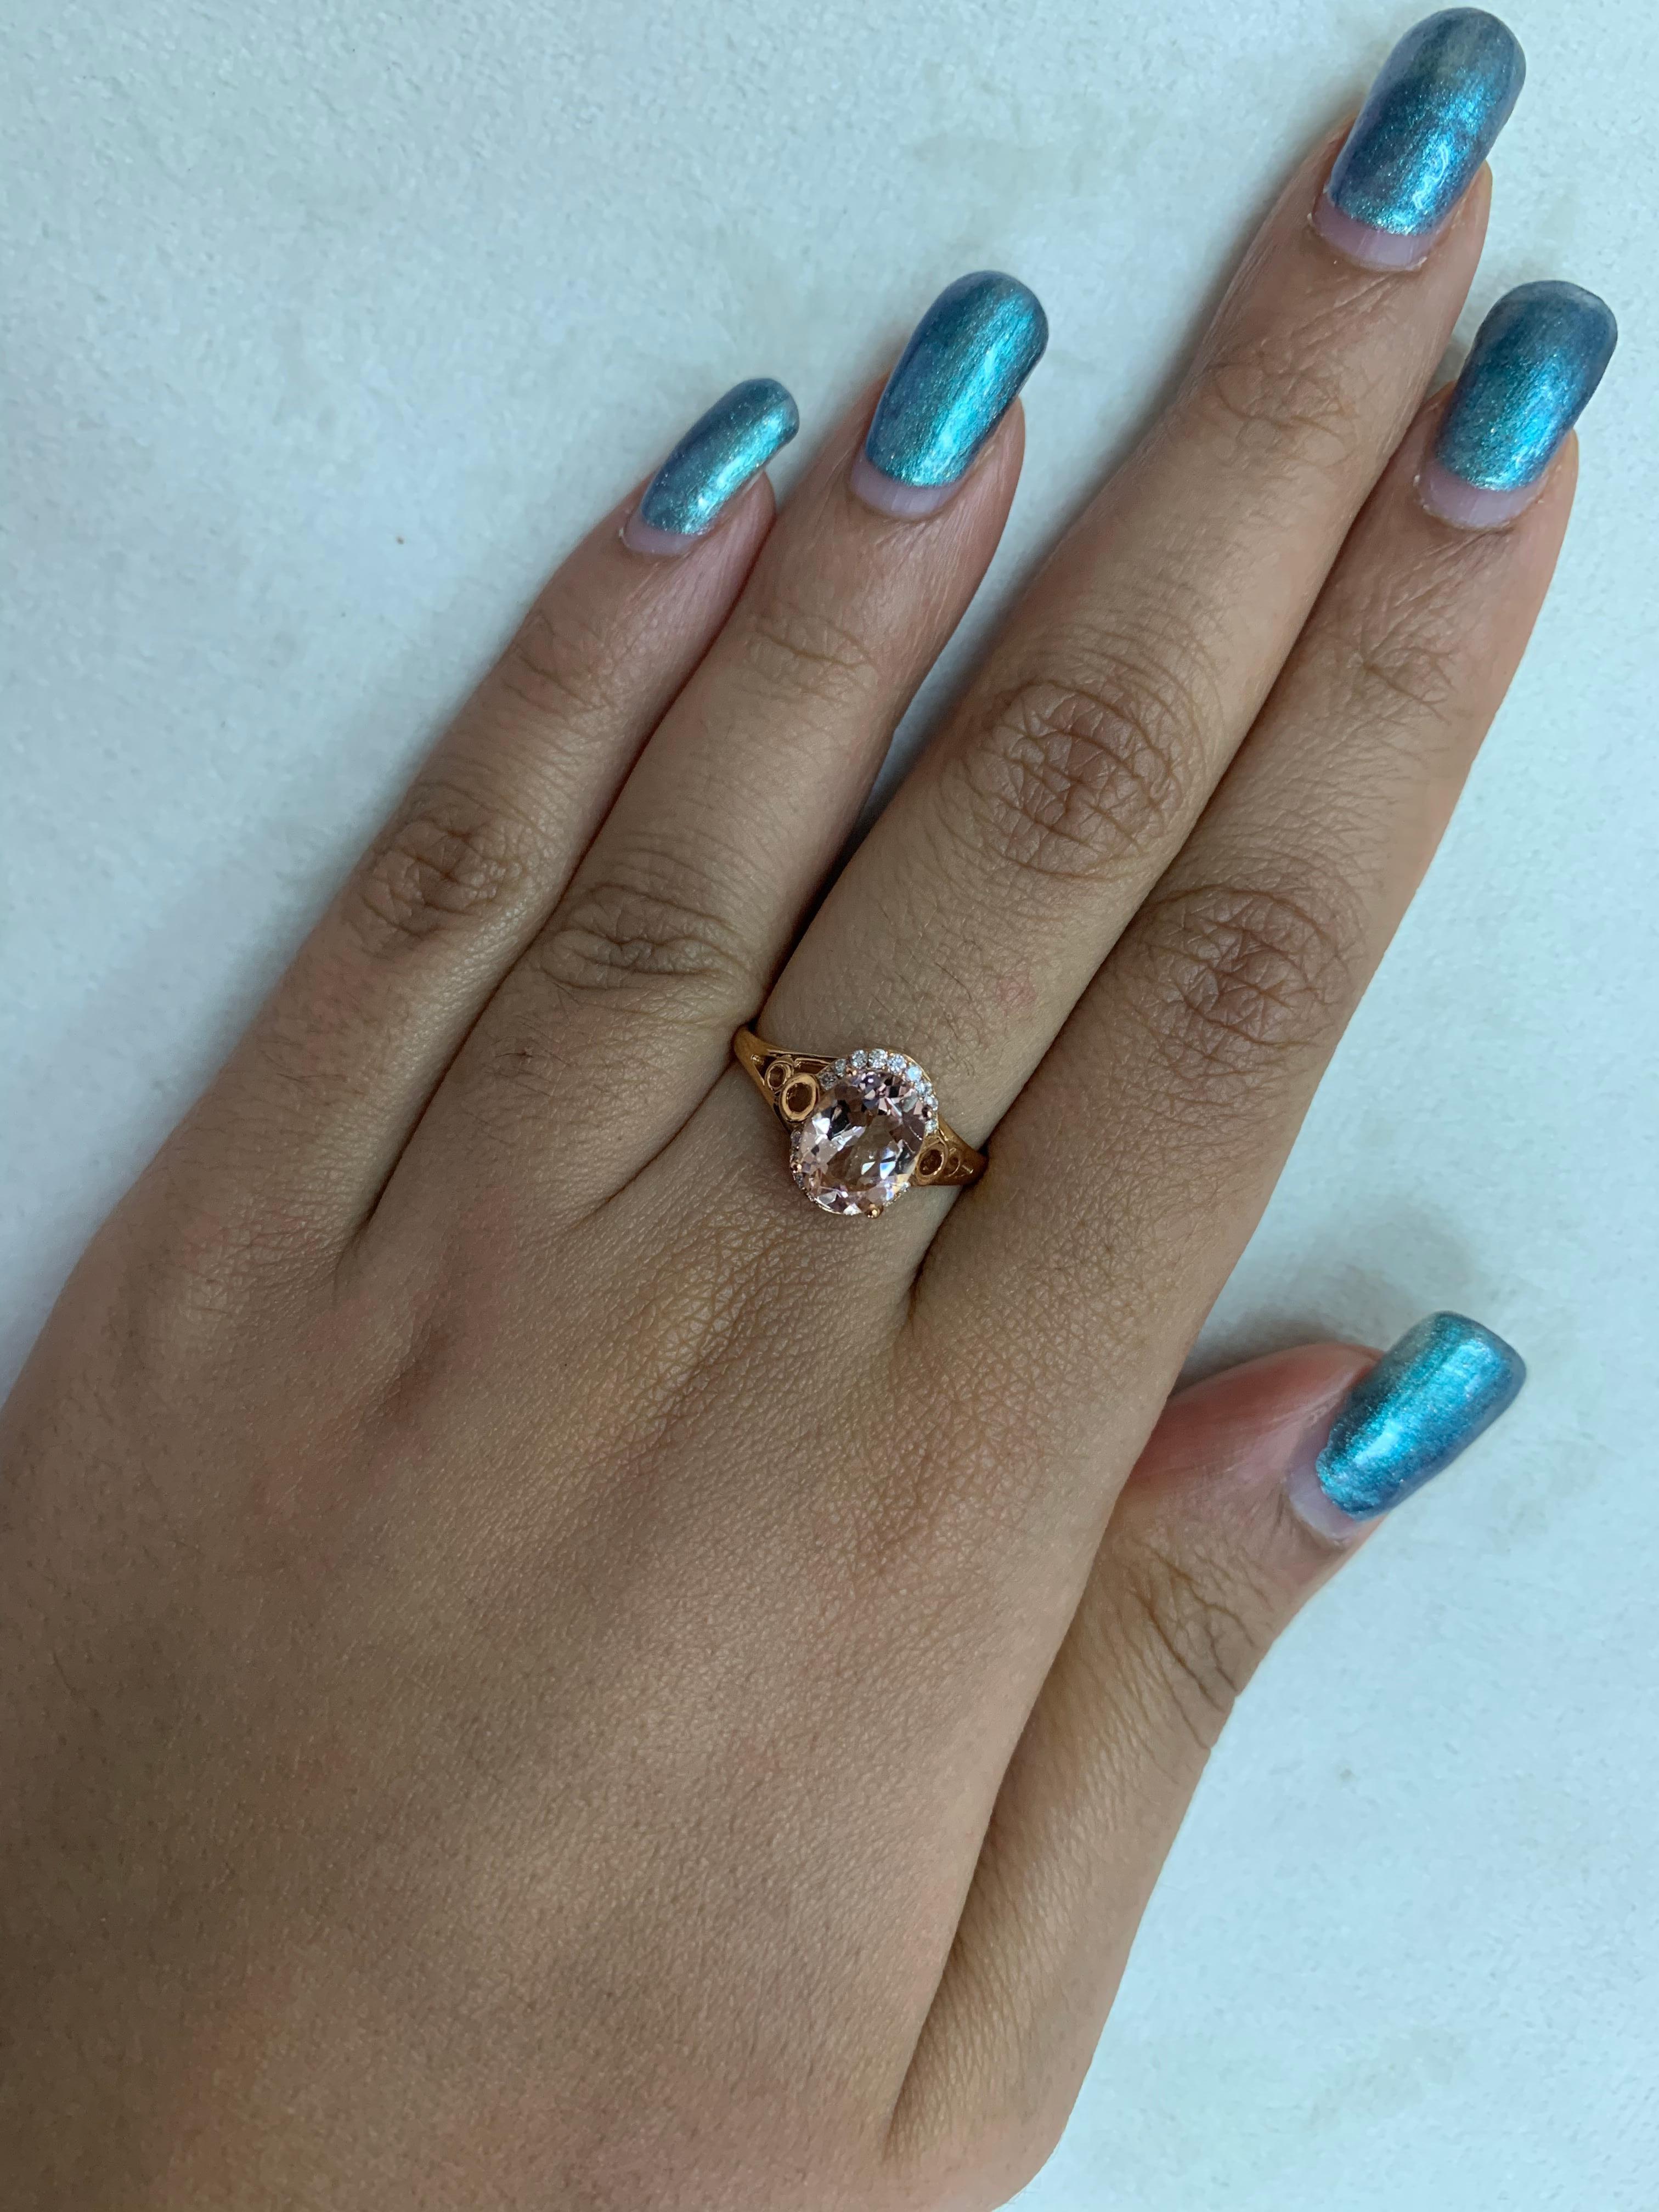 This collection features an array of magnificent morganites! Accented with diamonds these rings are made in rose gold and present a classic yet elegant look. 

Classic morganite ring in 18K rose gold with diamonds. 

Morganite: 1.72 carat oval